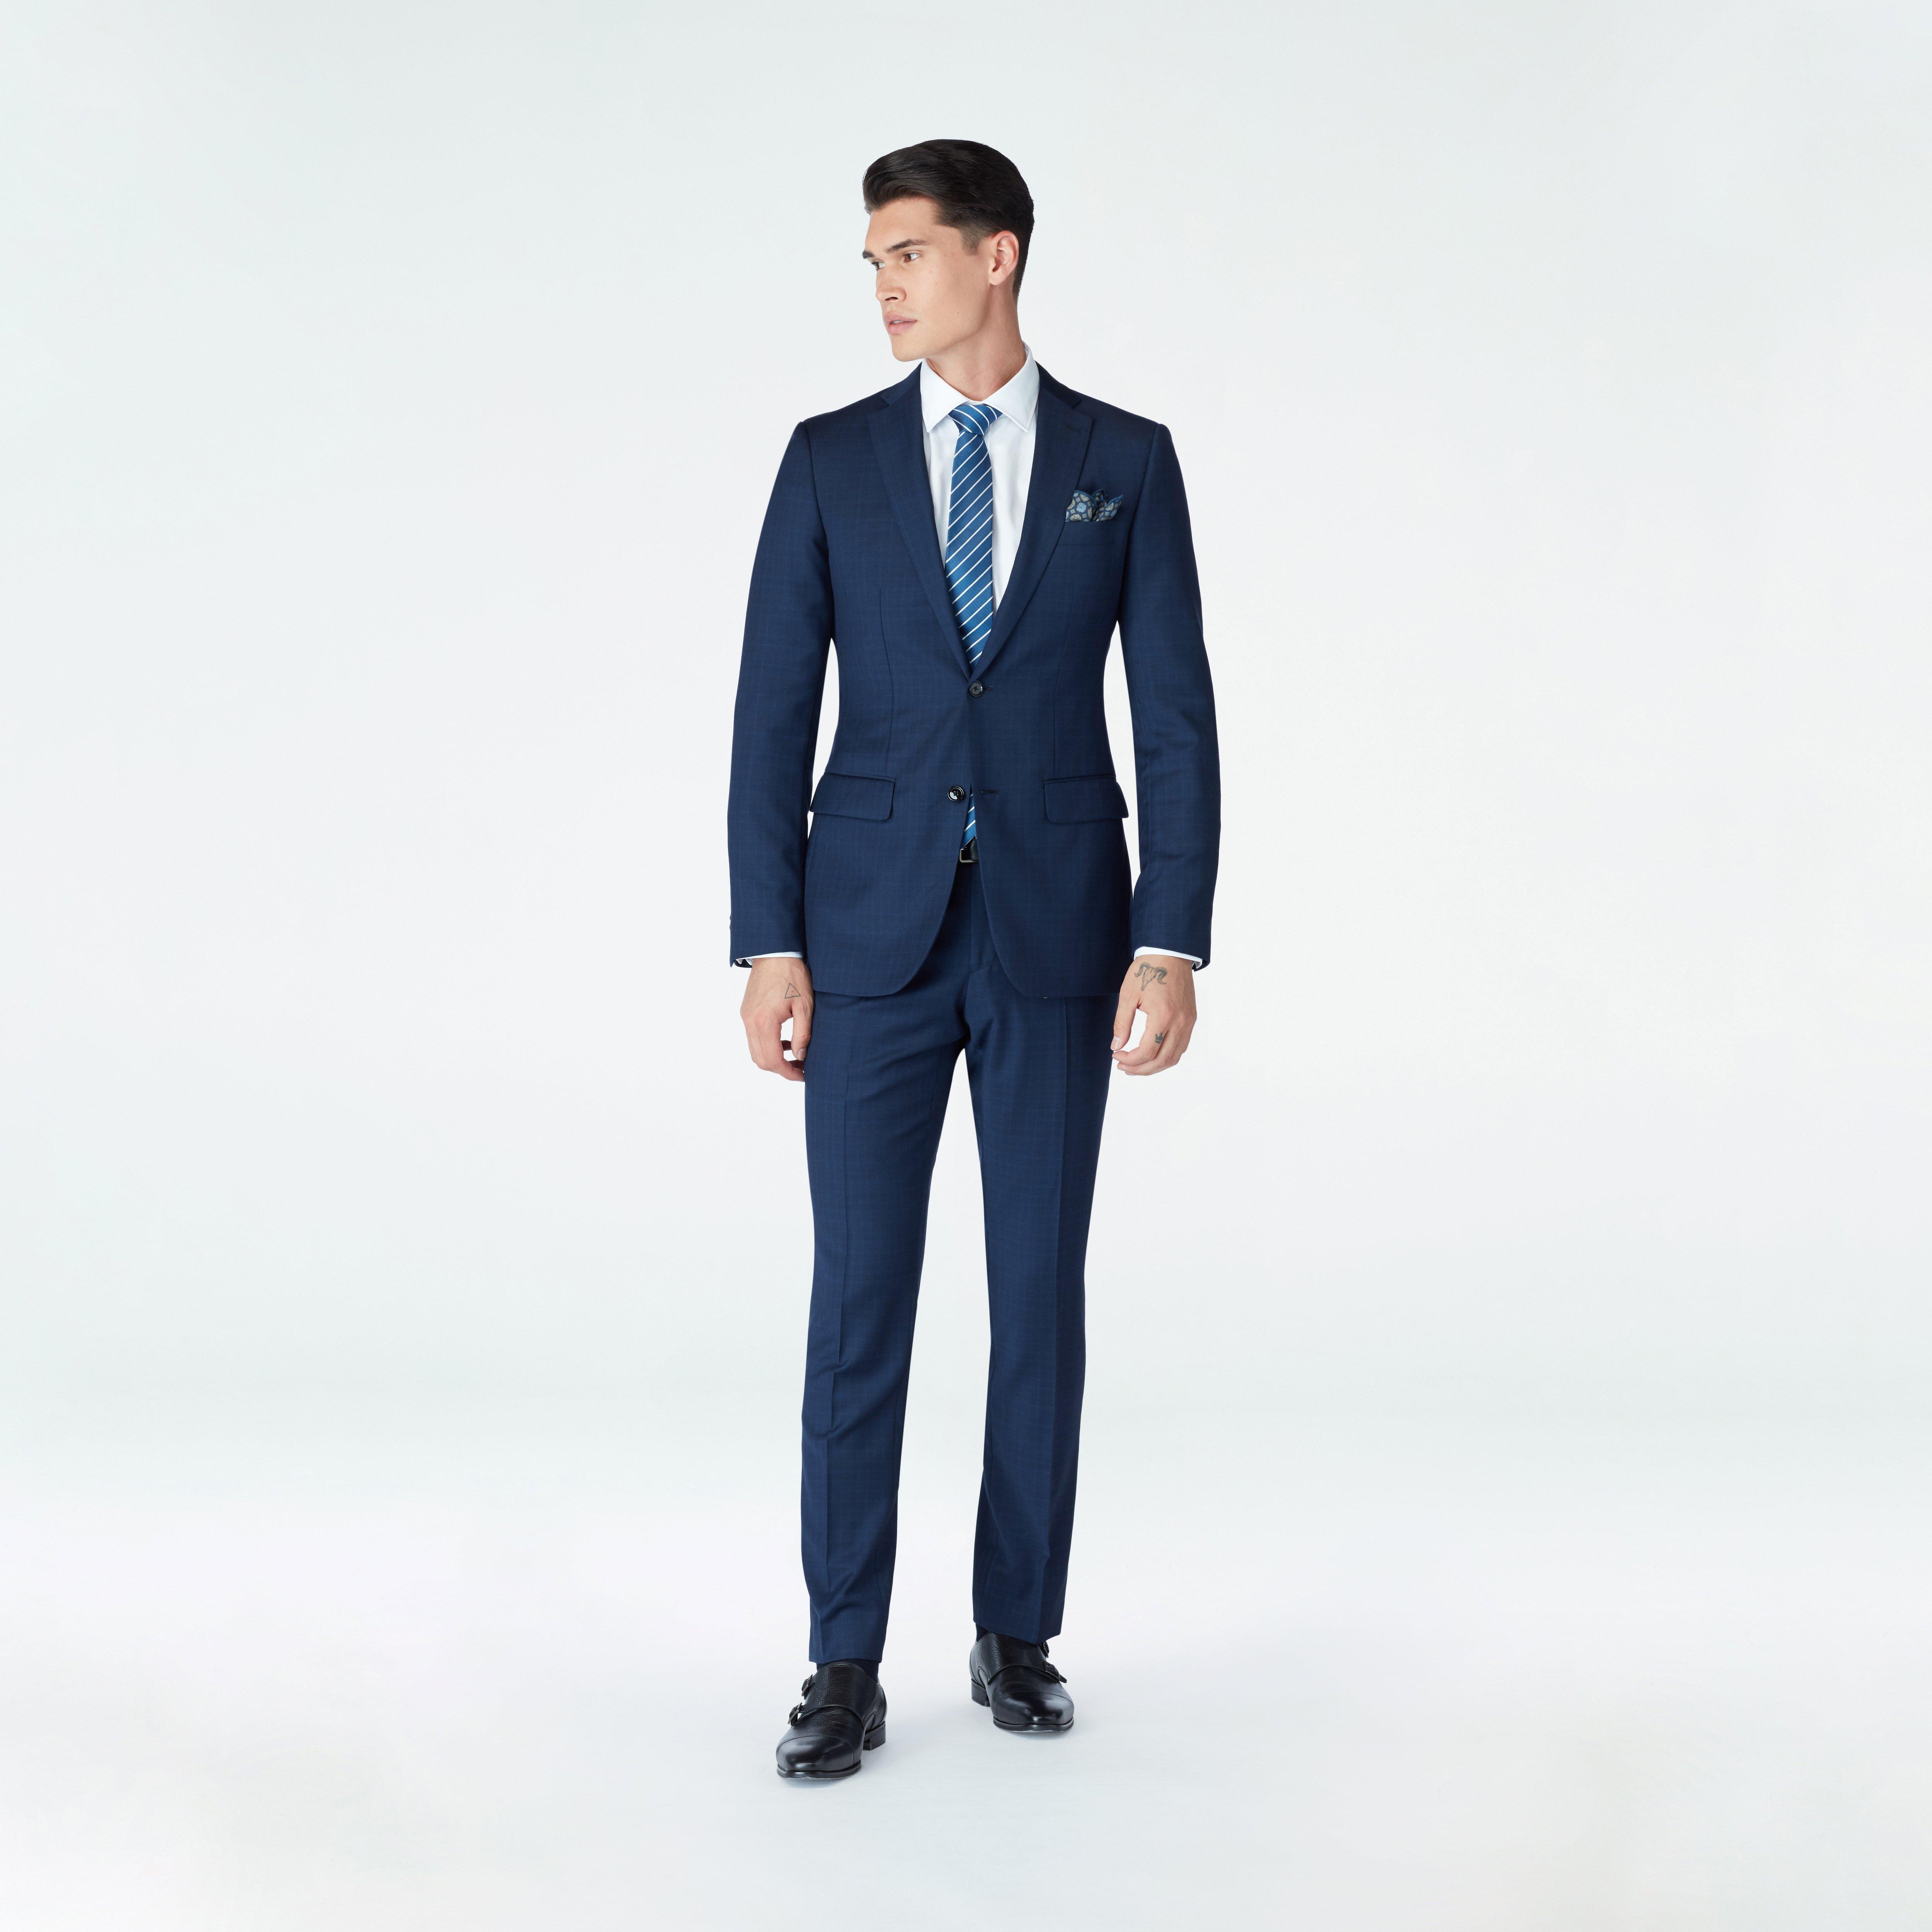 Custom Suits Made For You - Harrogate Glen Check Midnight Blue Suit ...